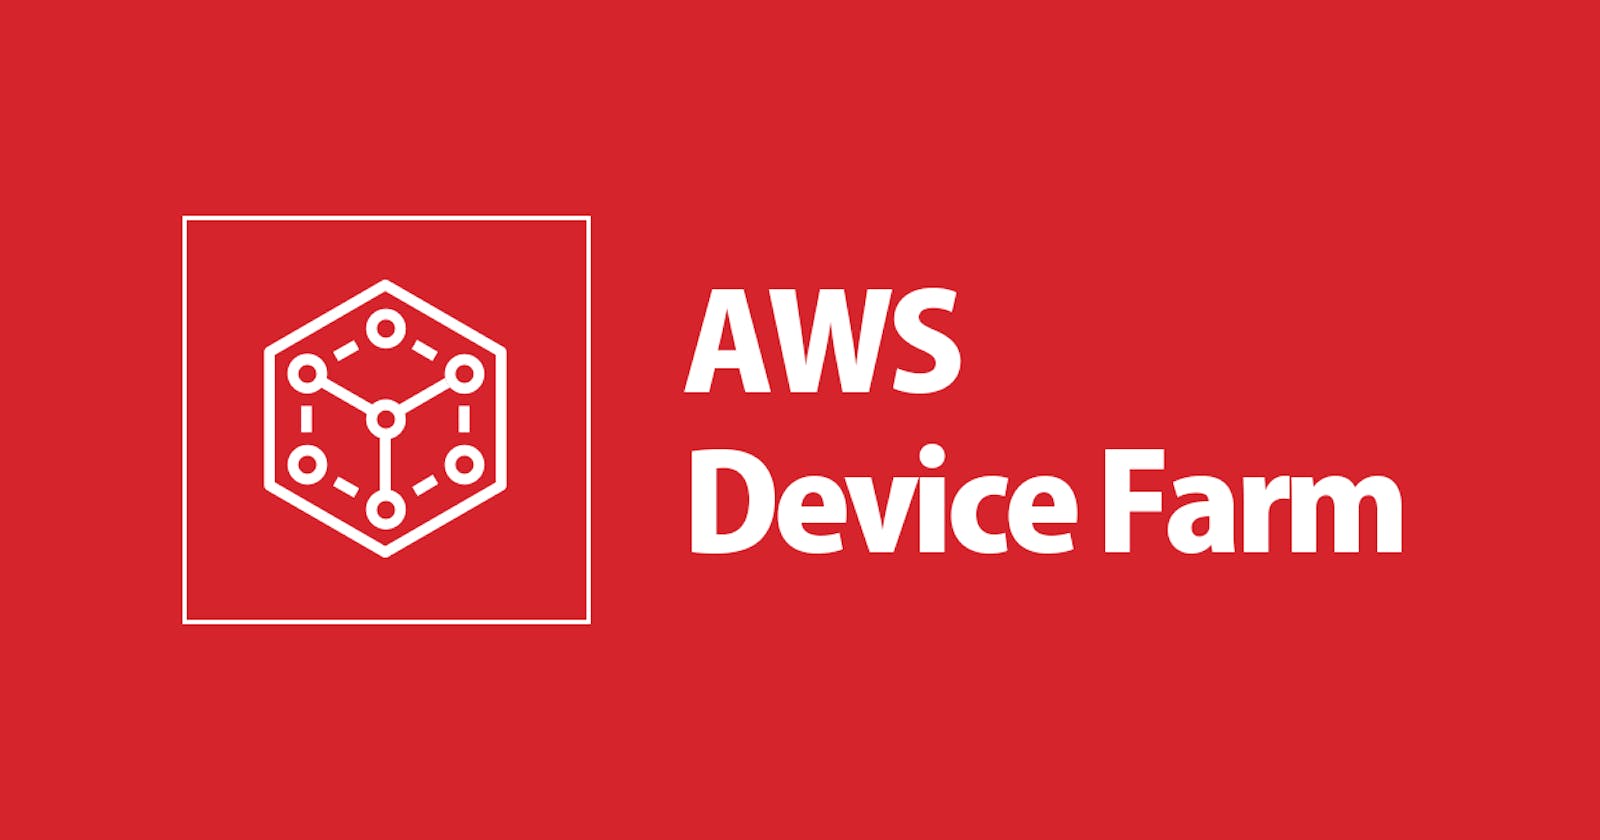 How to Use AWS Device Farm in AWS